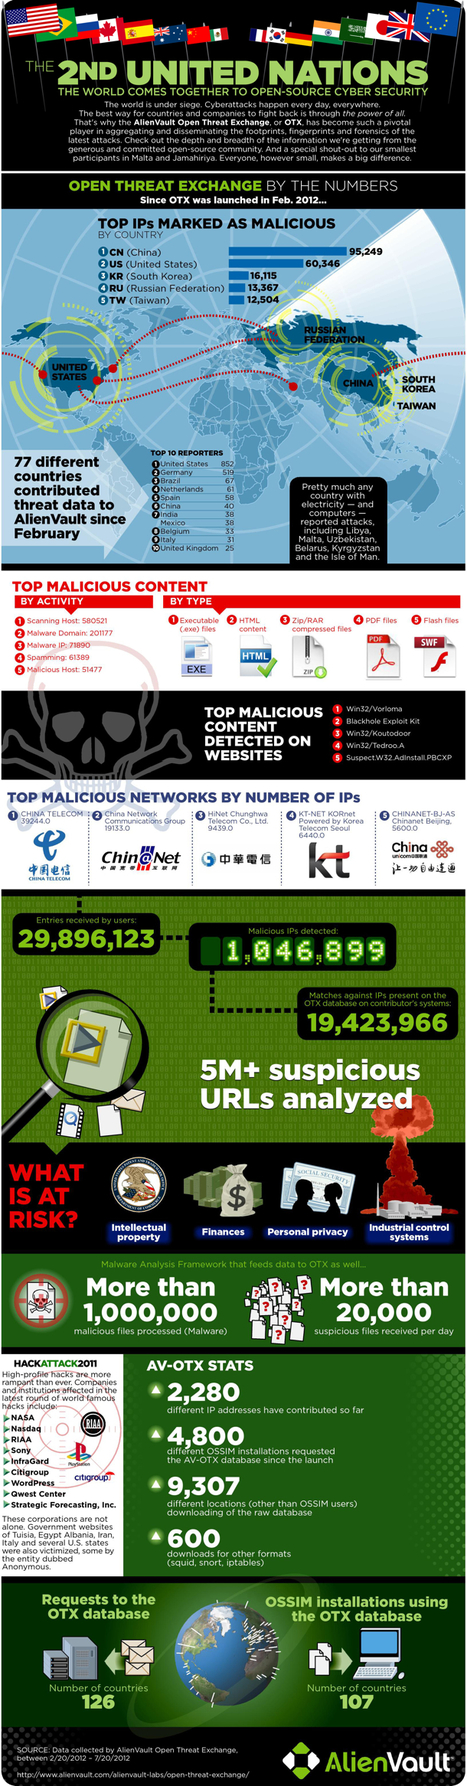 Why Cyber Security is Important [Infographic] | Latest Social Media News | Scoop.it